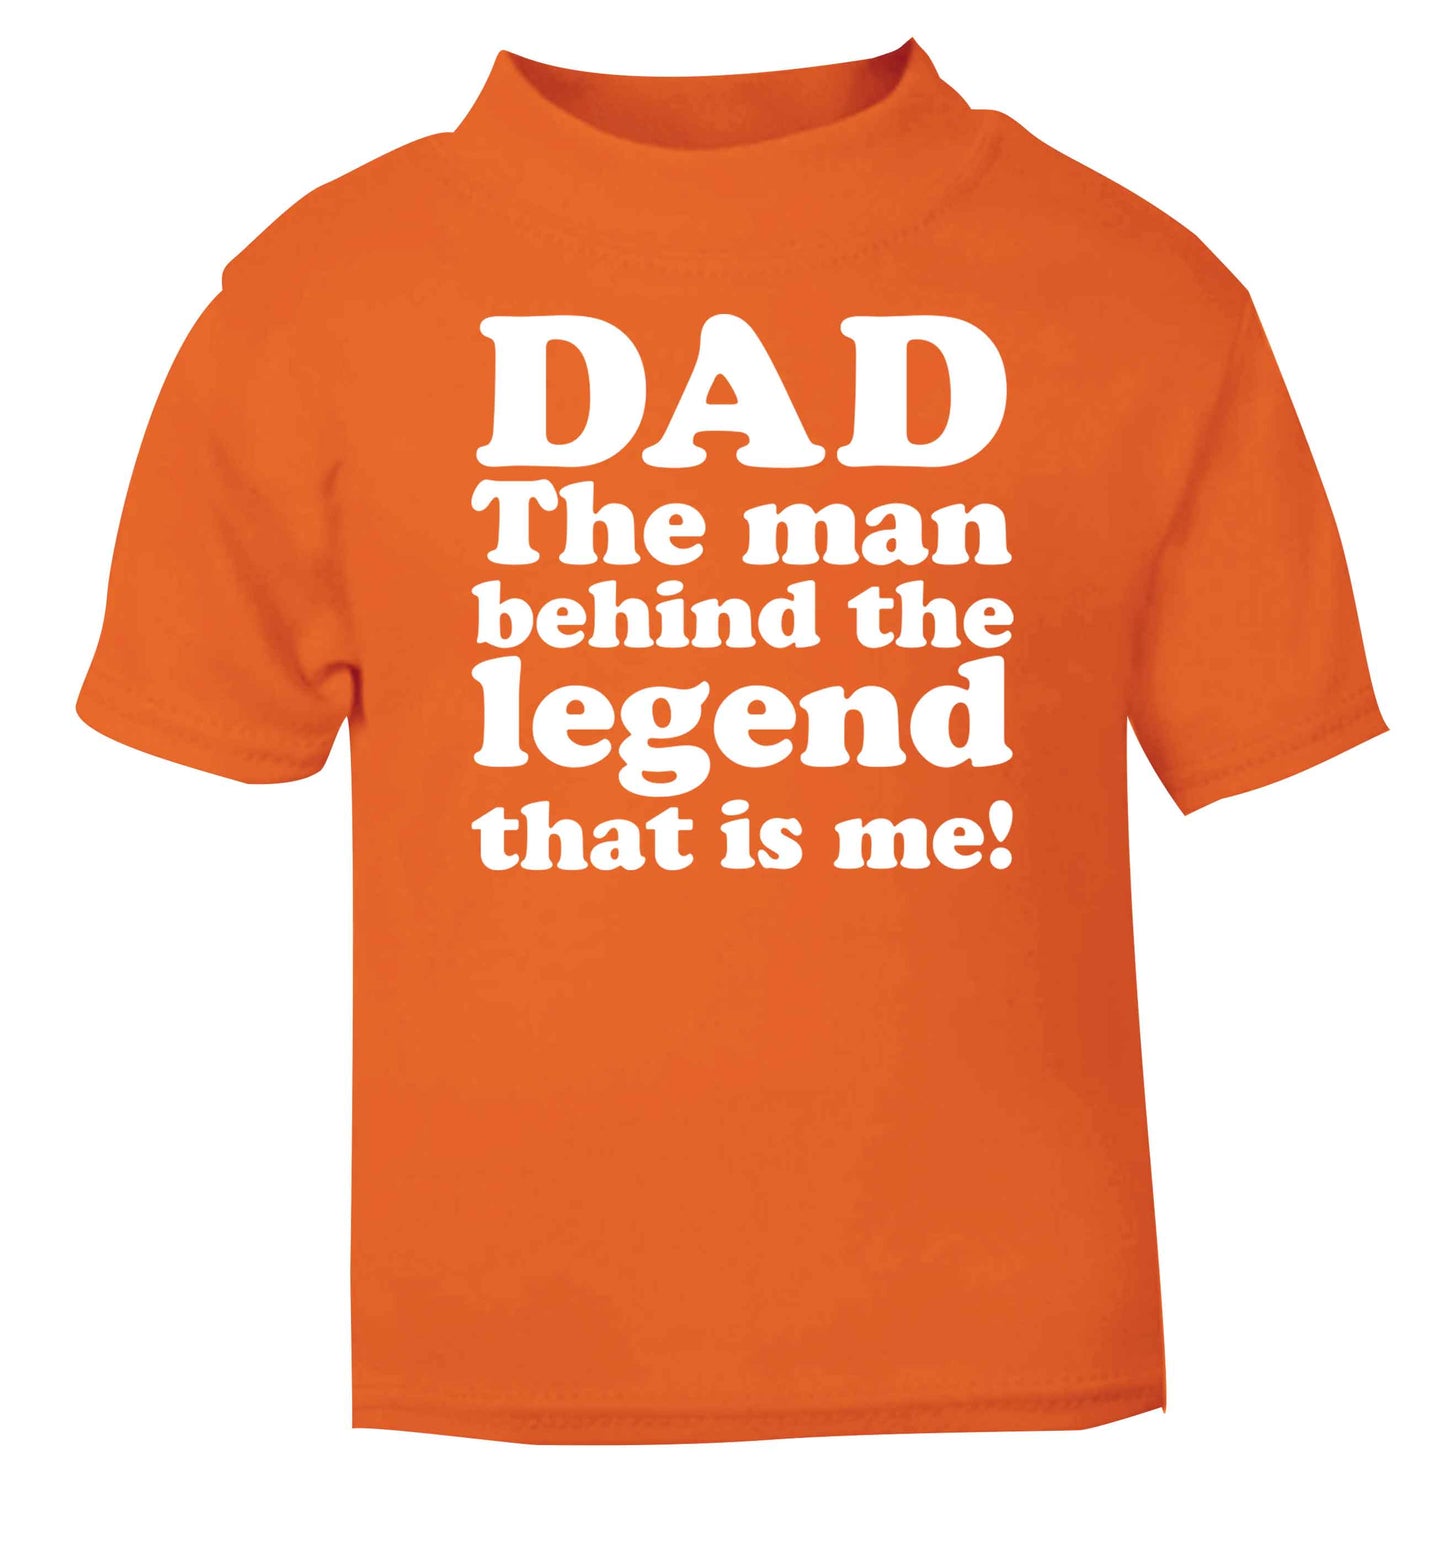 Dad the man behind the legend that is me orange baby toddler Tshirt 2 Years